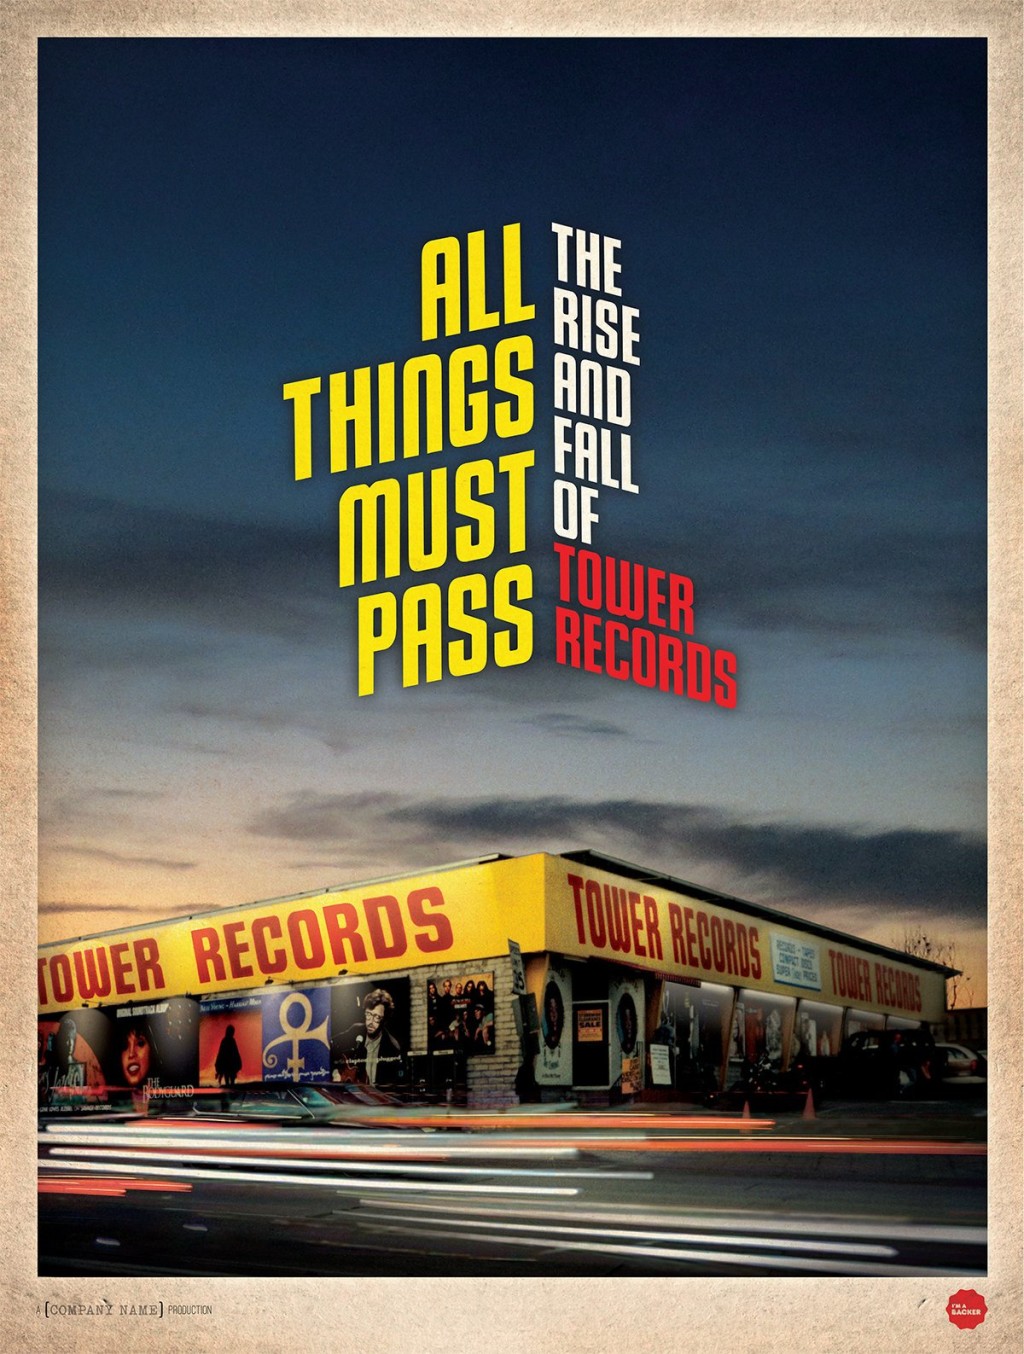 All Things Must Pass: The Rise and Fall of Tower Records 2015 - Full (HD)